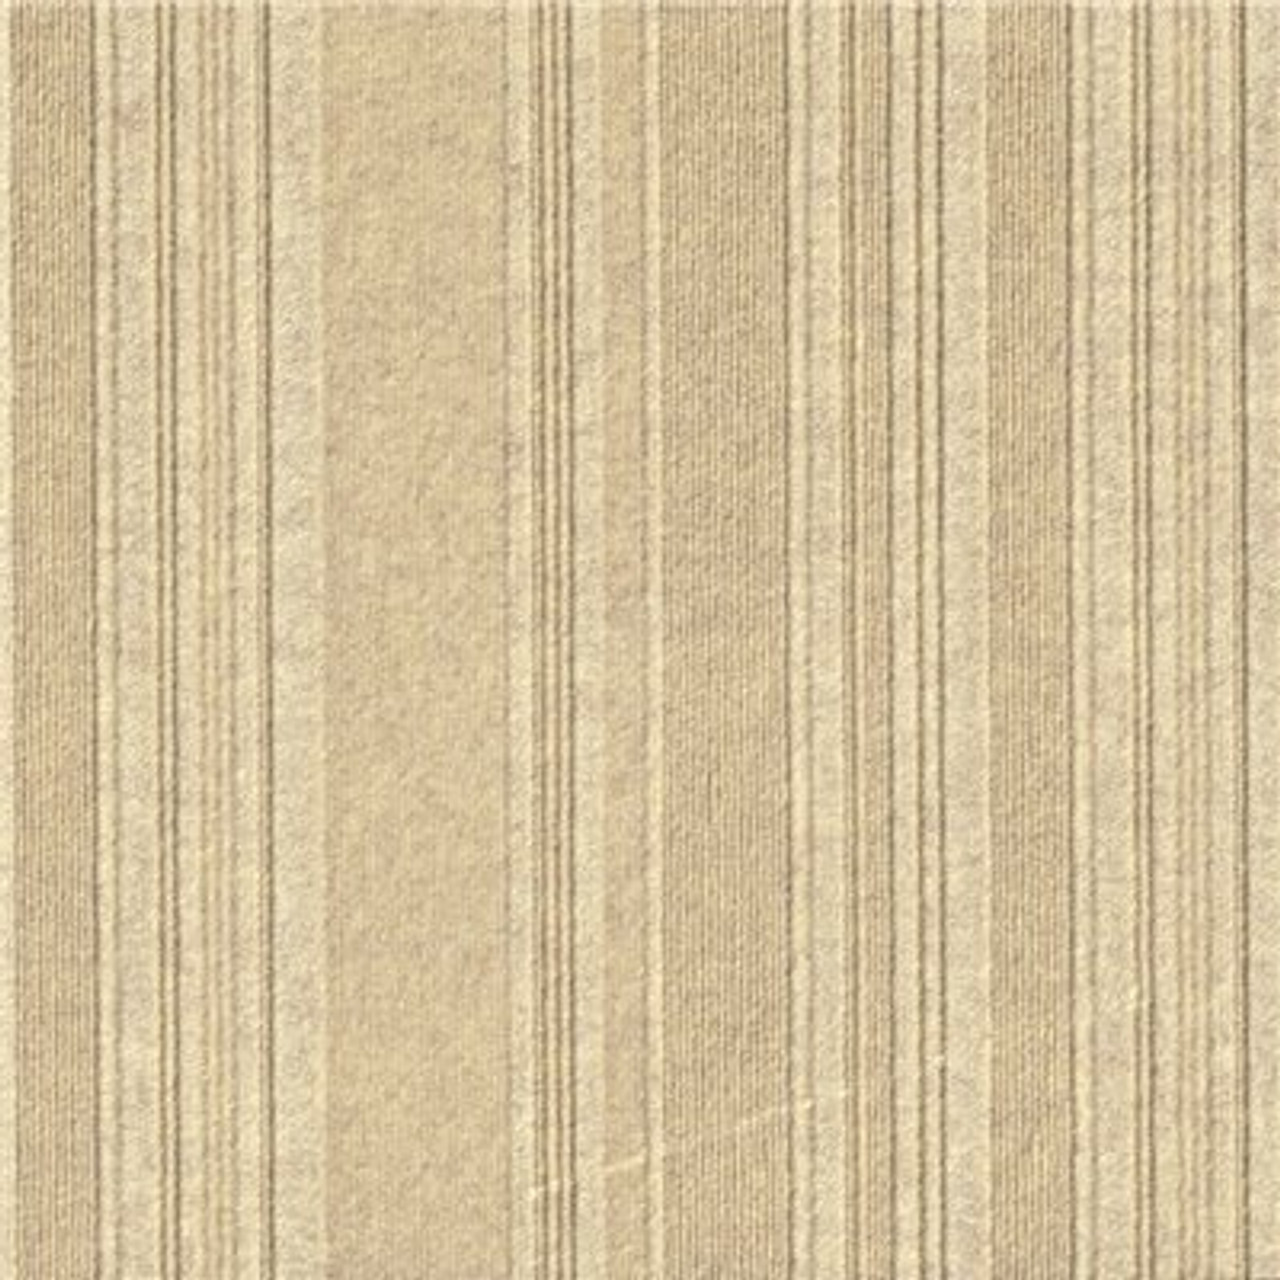 Foss Peel And Stick First Impressions Barcode Rib Ivory 24 In. X 24 In. Commercial Carpet Tile (15 Tiles/Case)